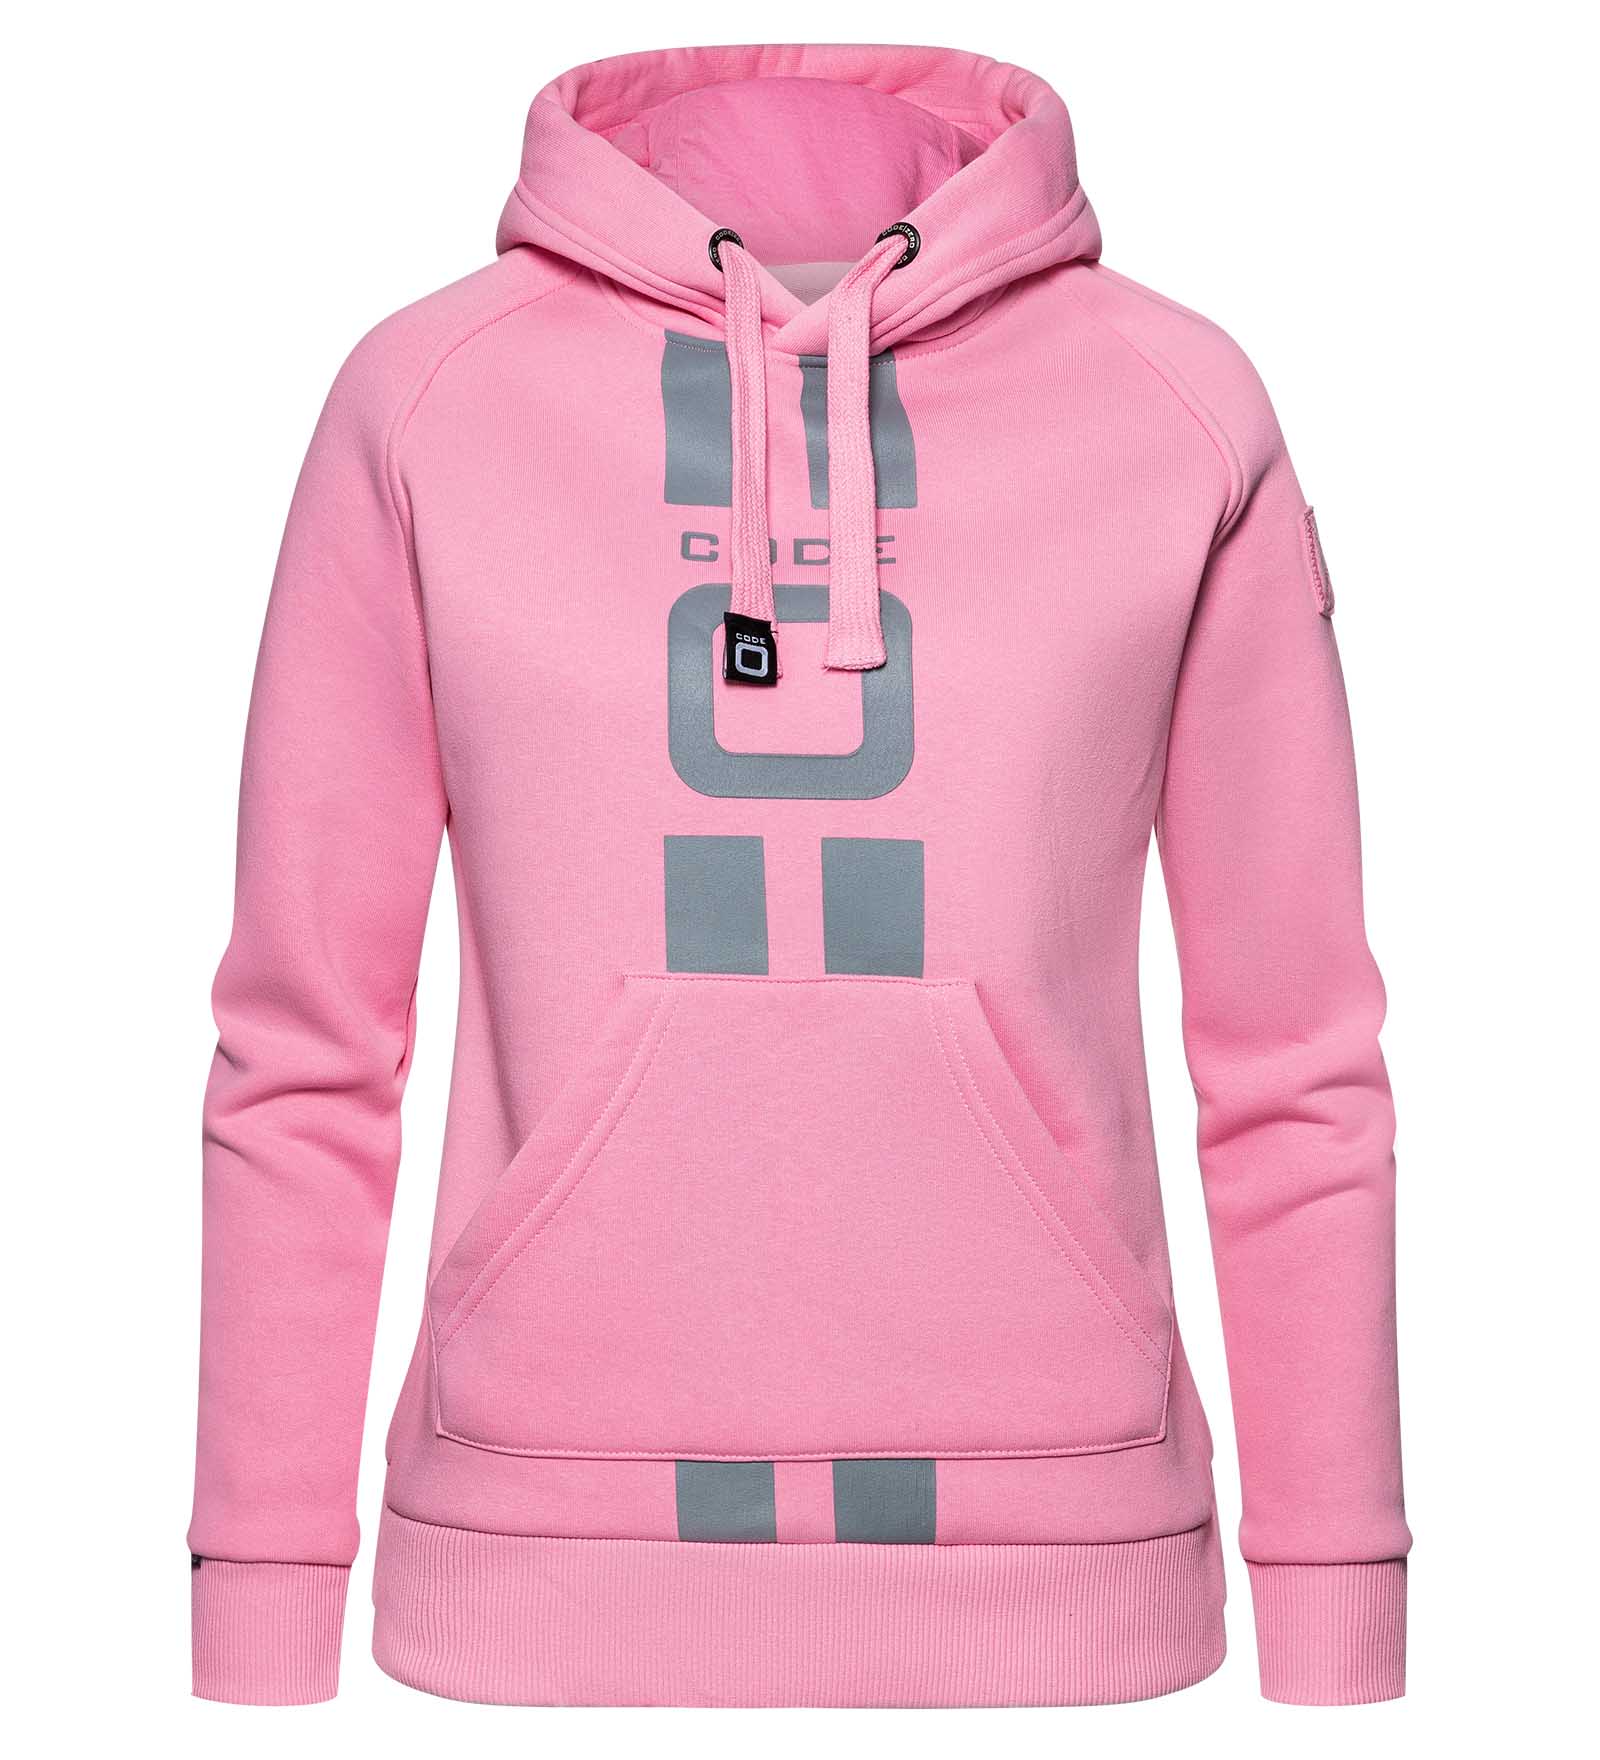 Hoodie for women in pink